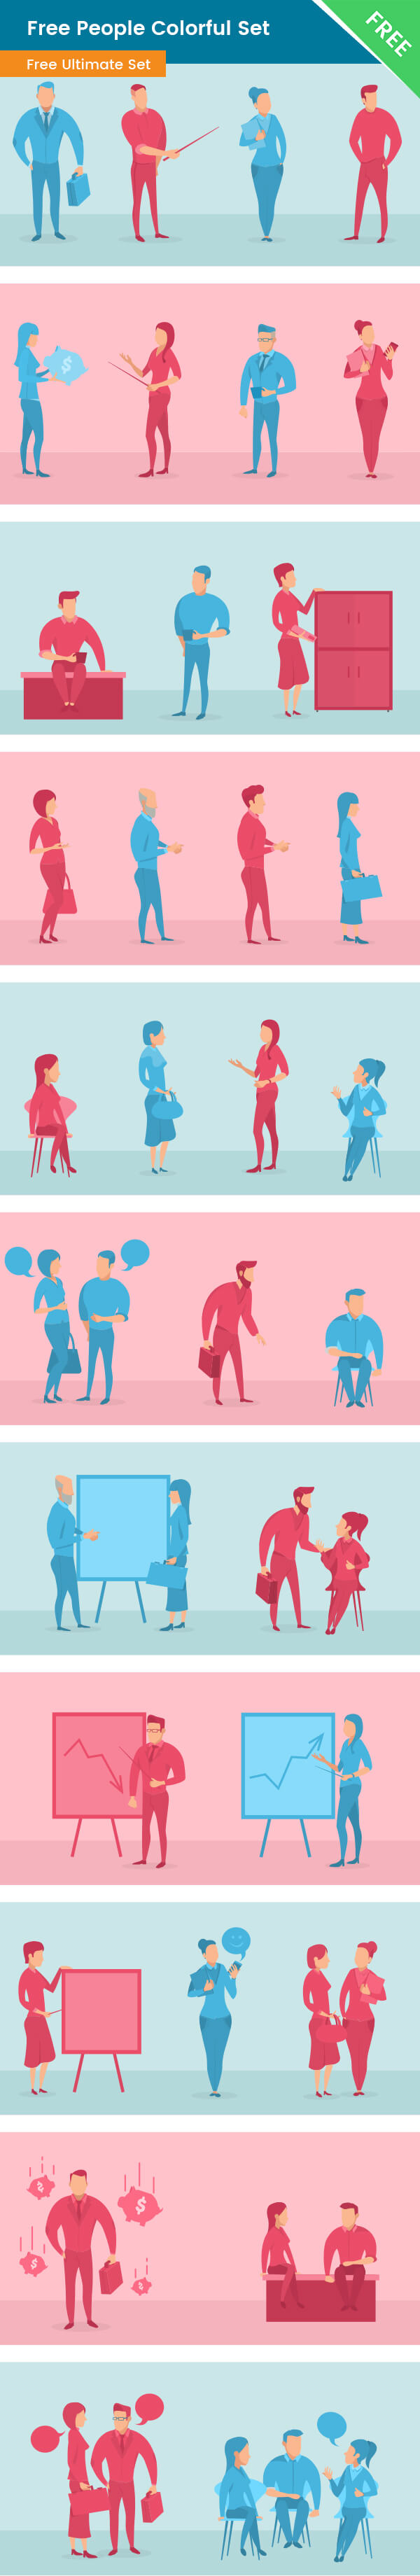 People vector Free colorful set